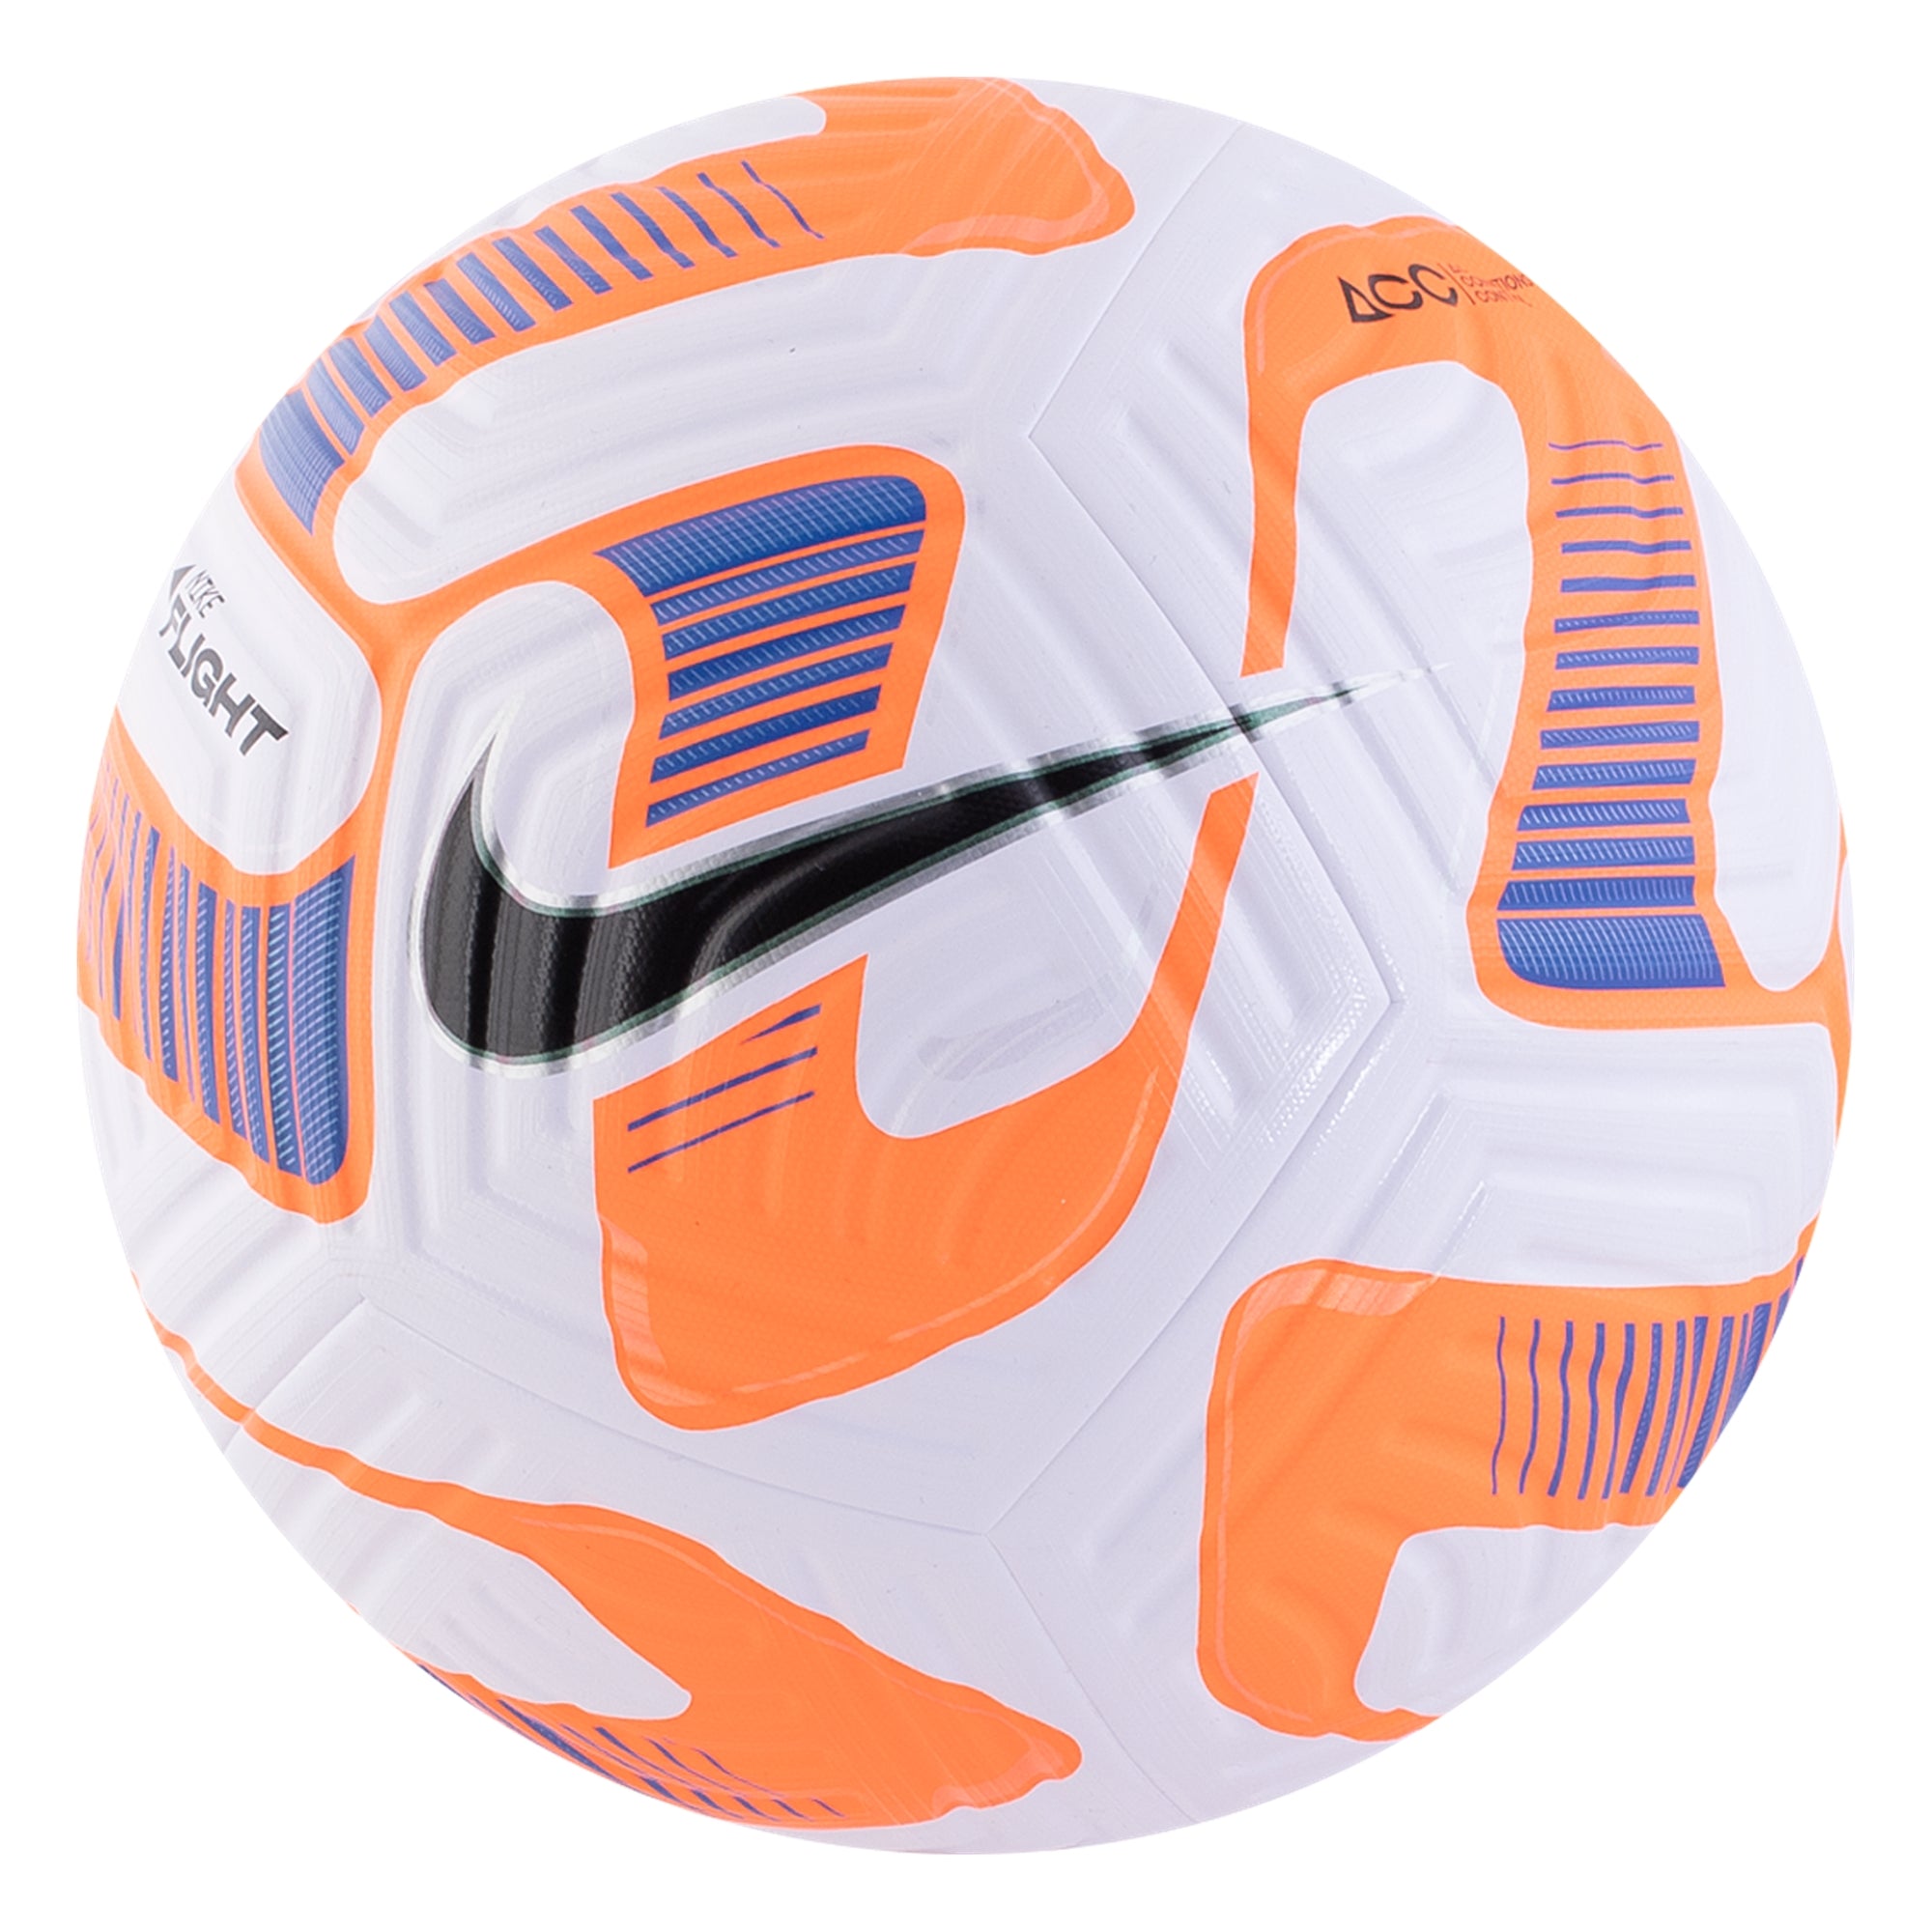 World Cup Soccer Balls Can Be a Drag